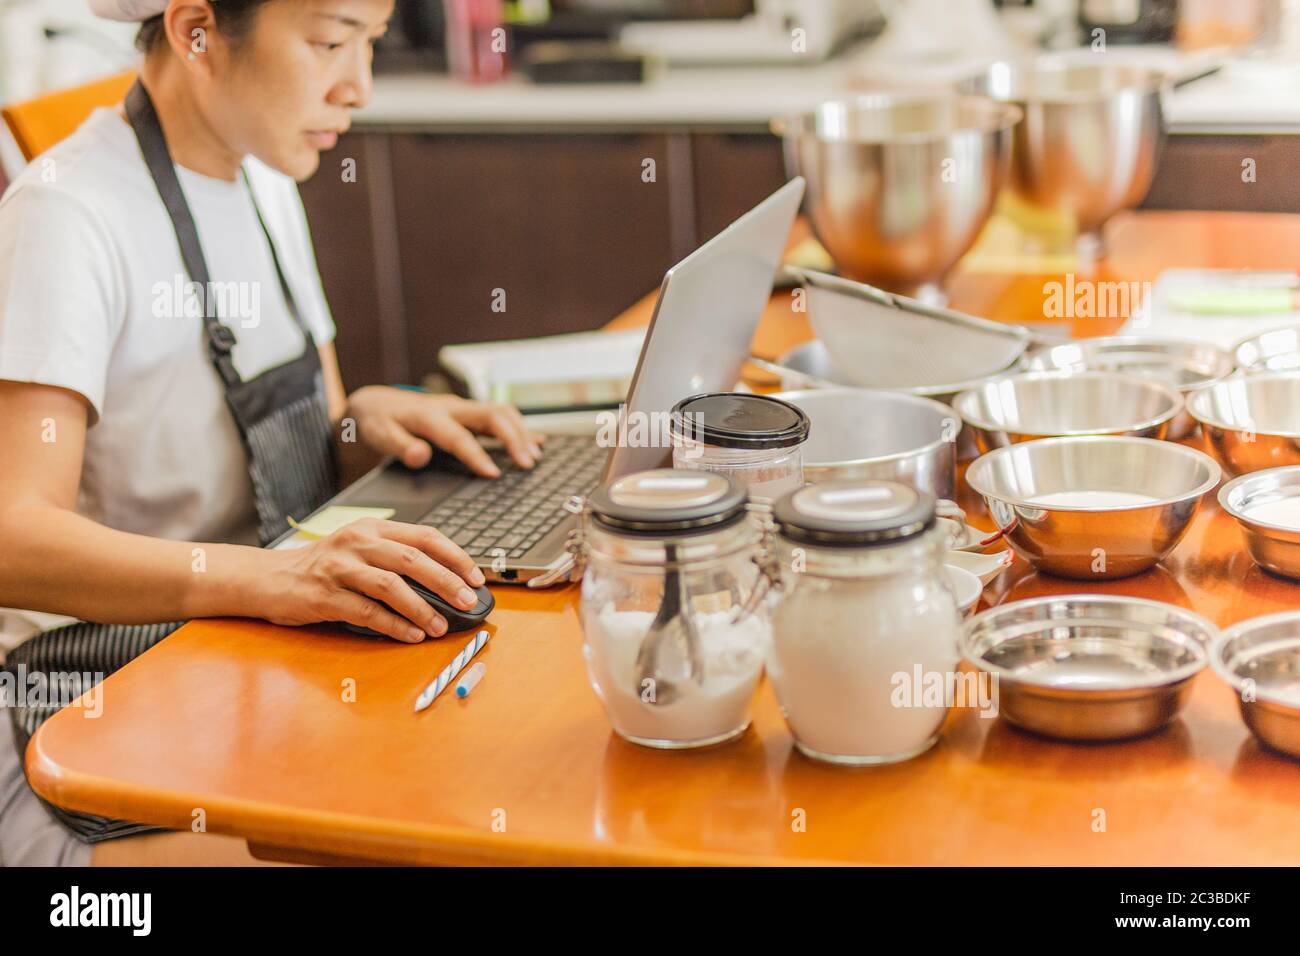 Female baker working on laptop with bakery ingredient on table. Stock Photo